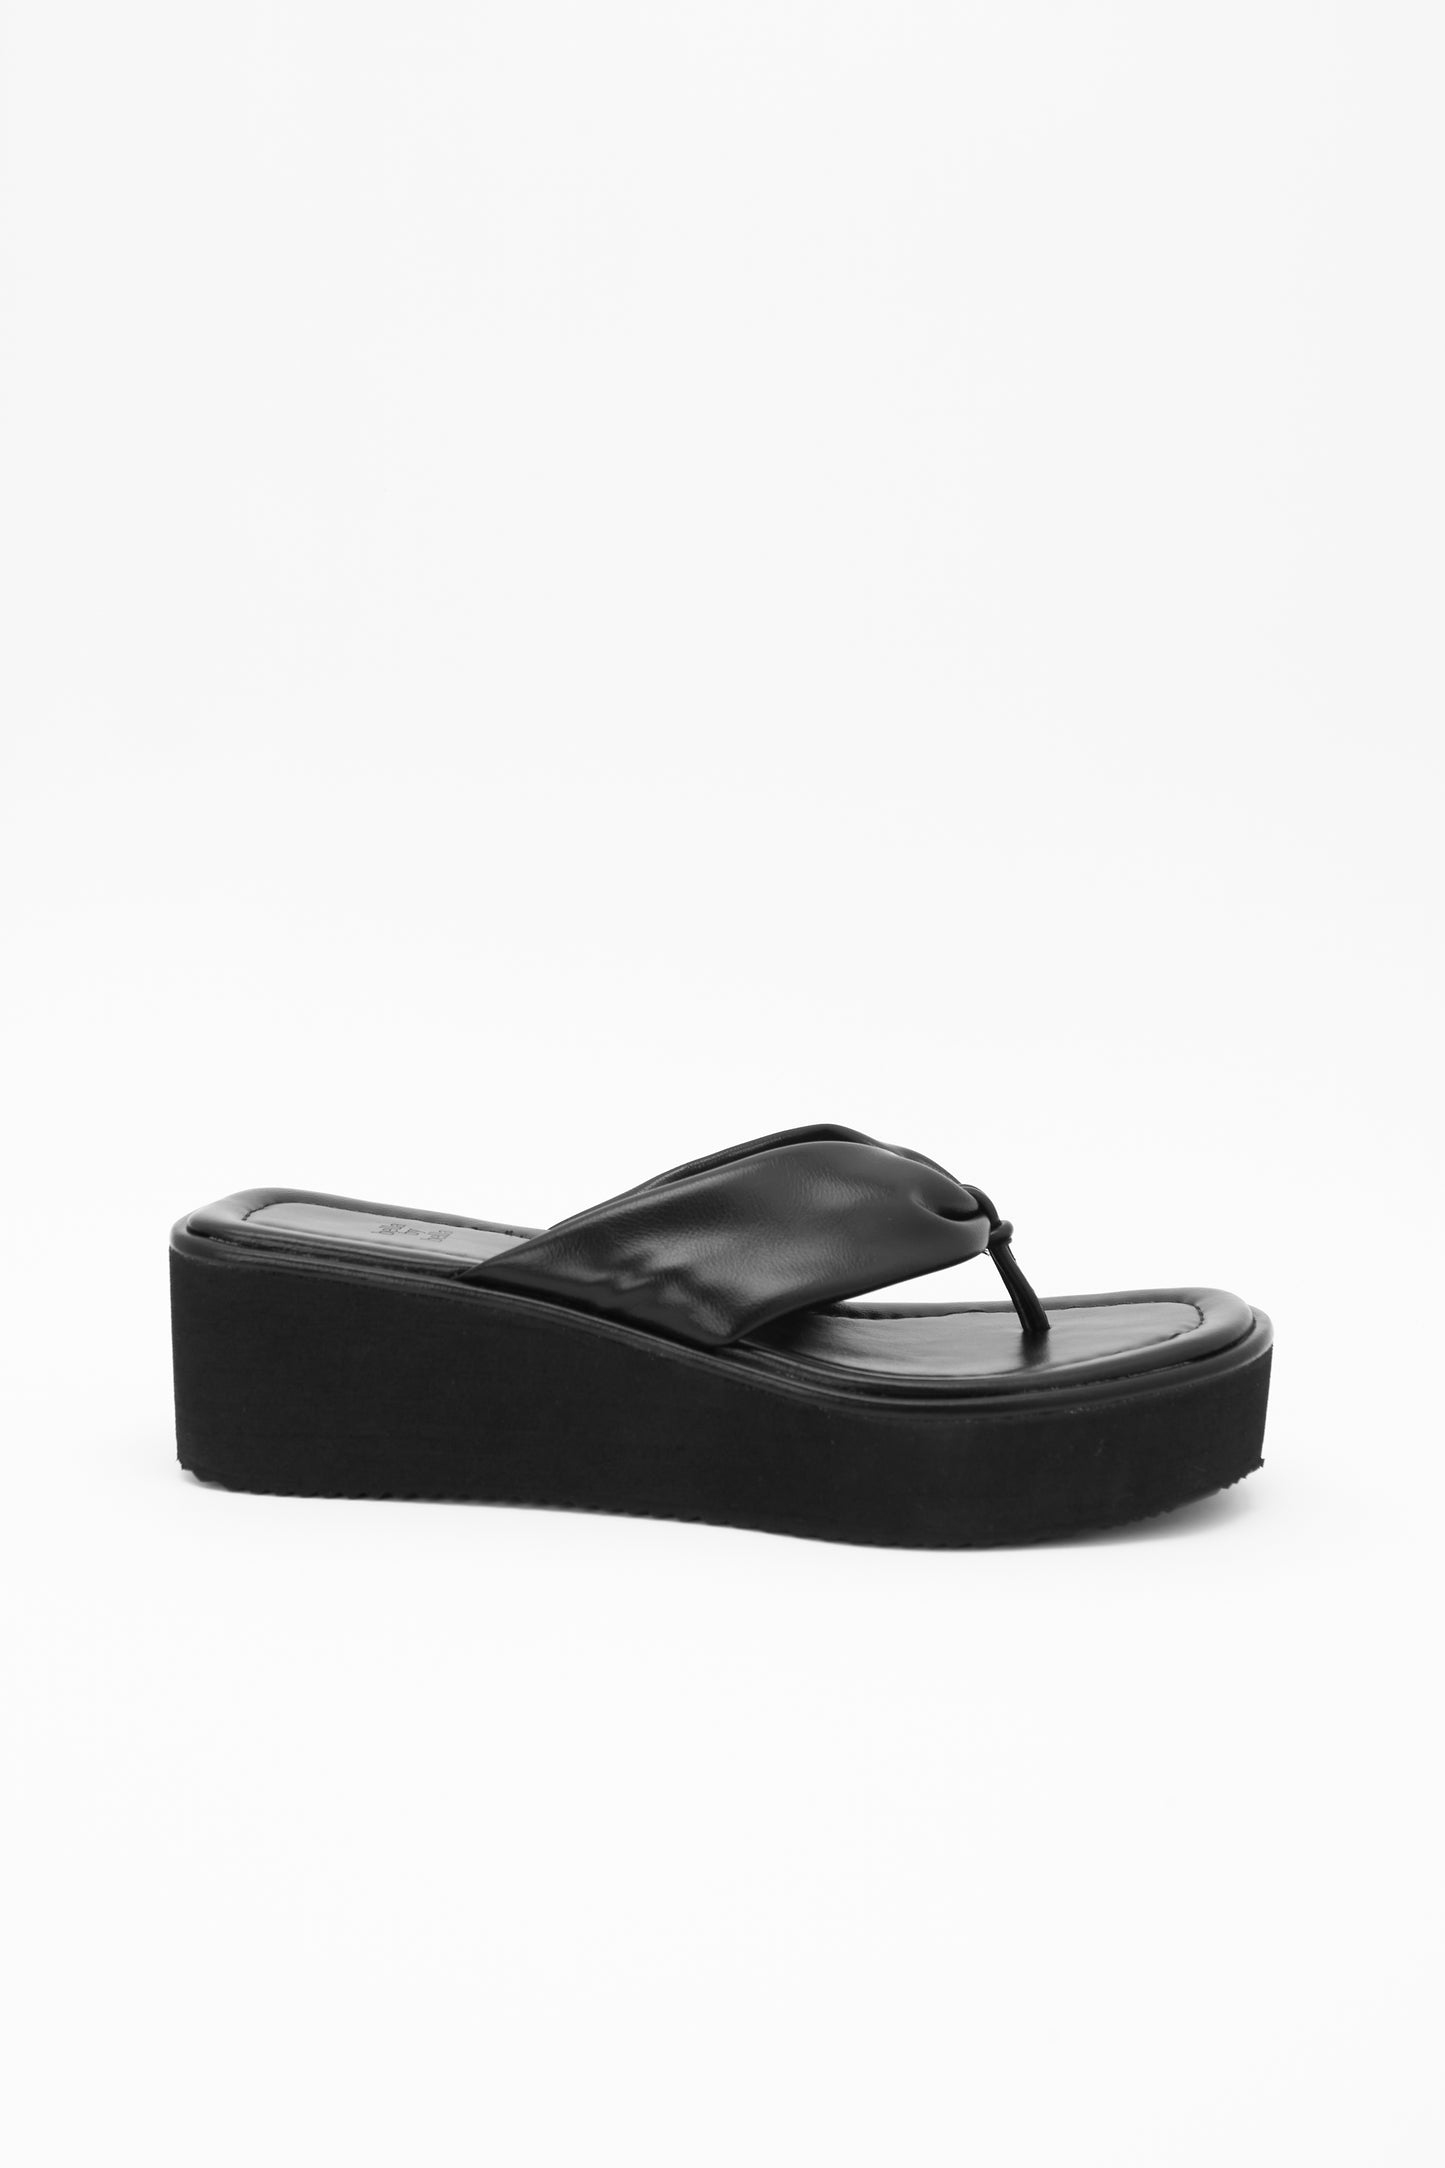 Gathered Leather Wedge Sandals, Black